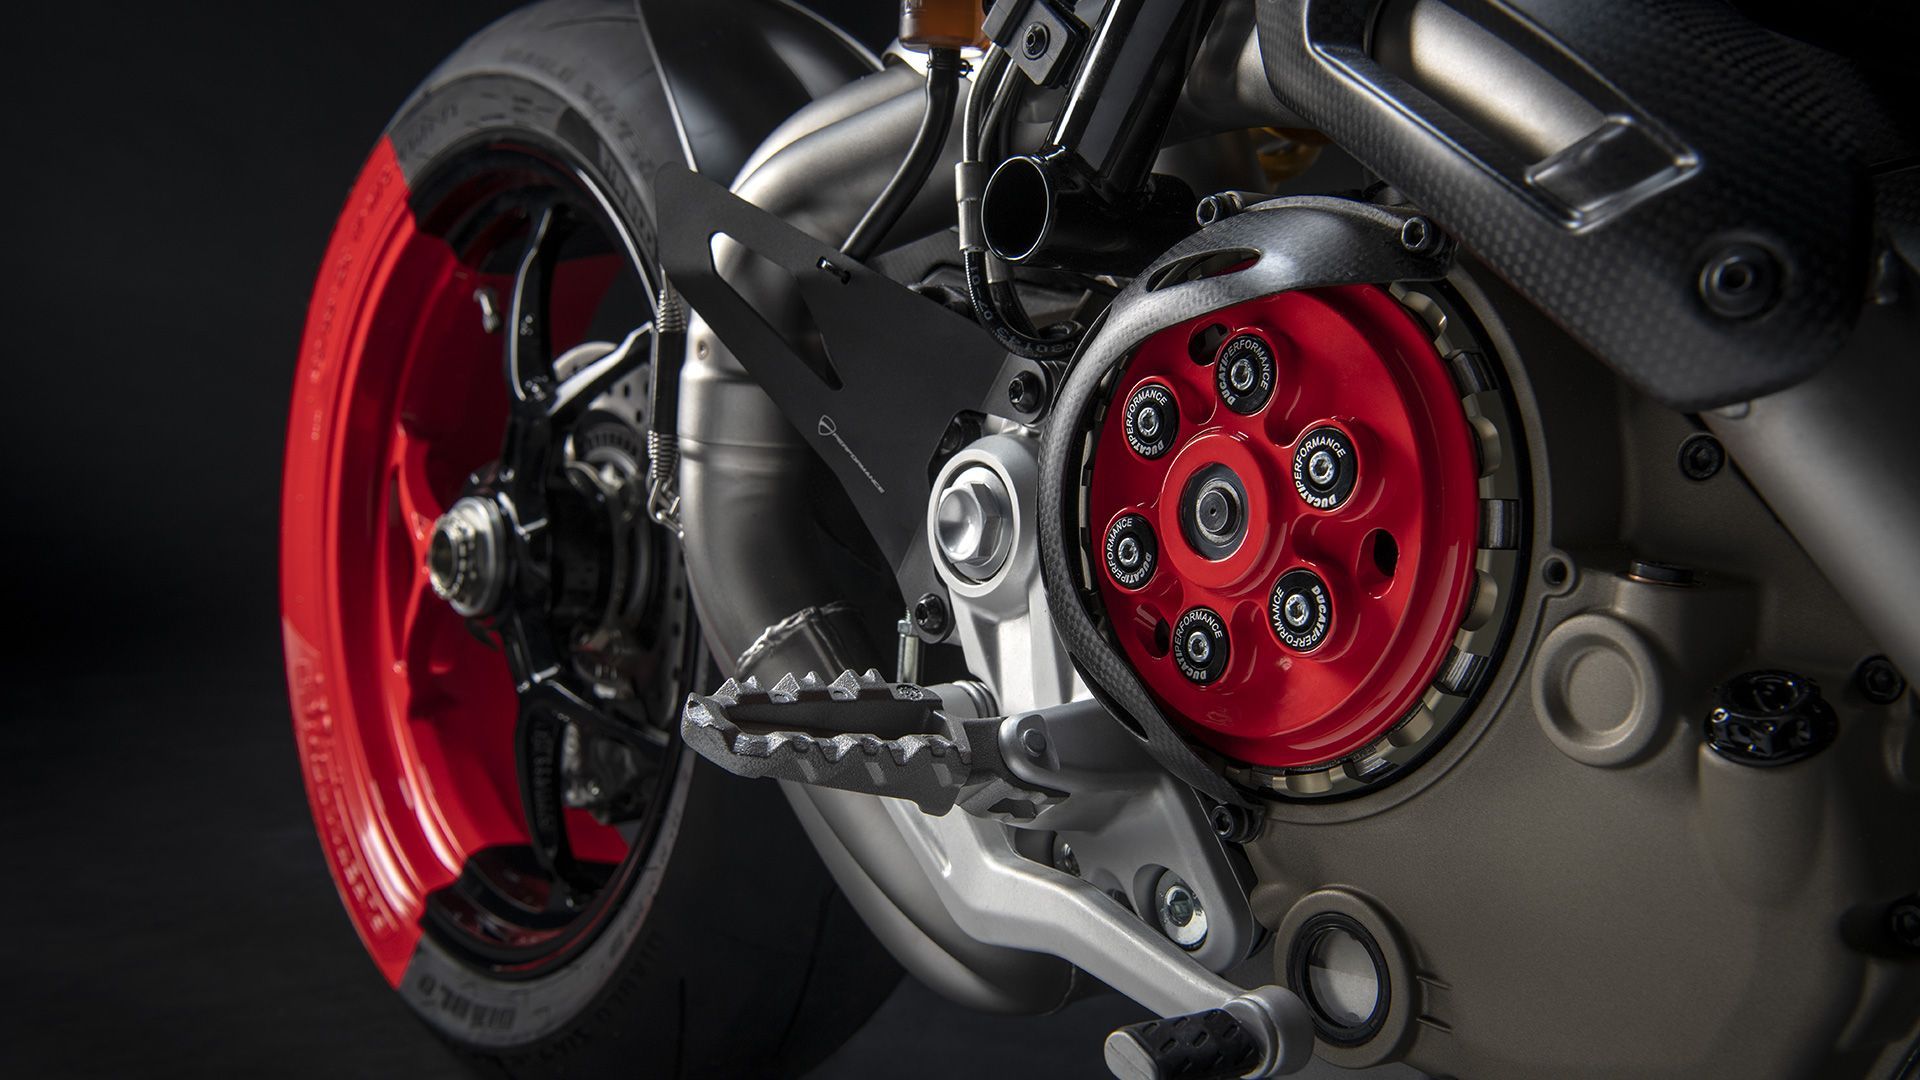 A dry clutch surrounded by carbon fiber; so trick!